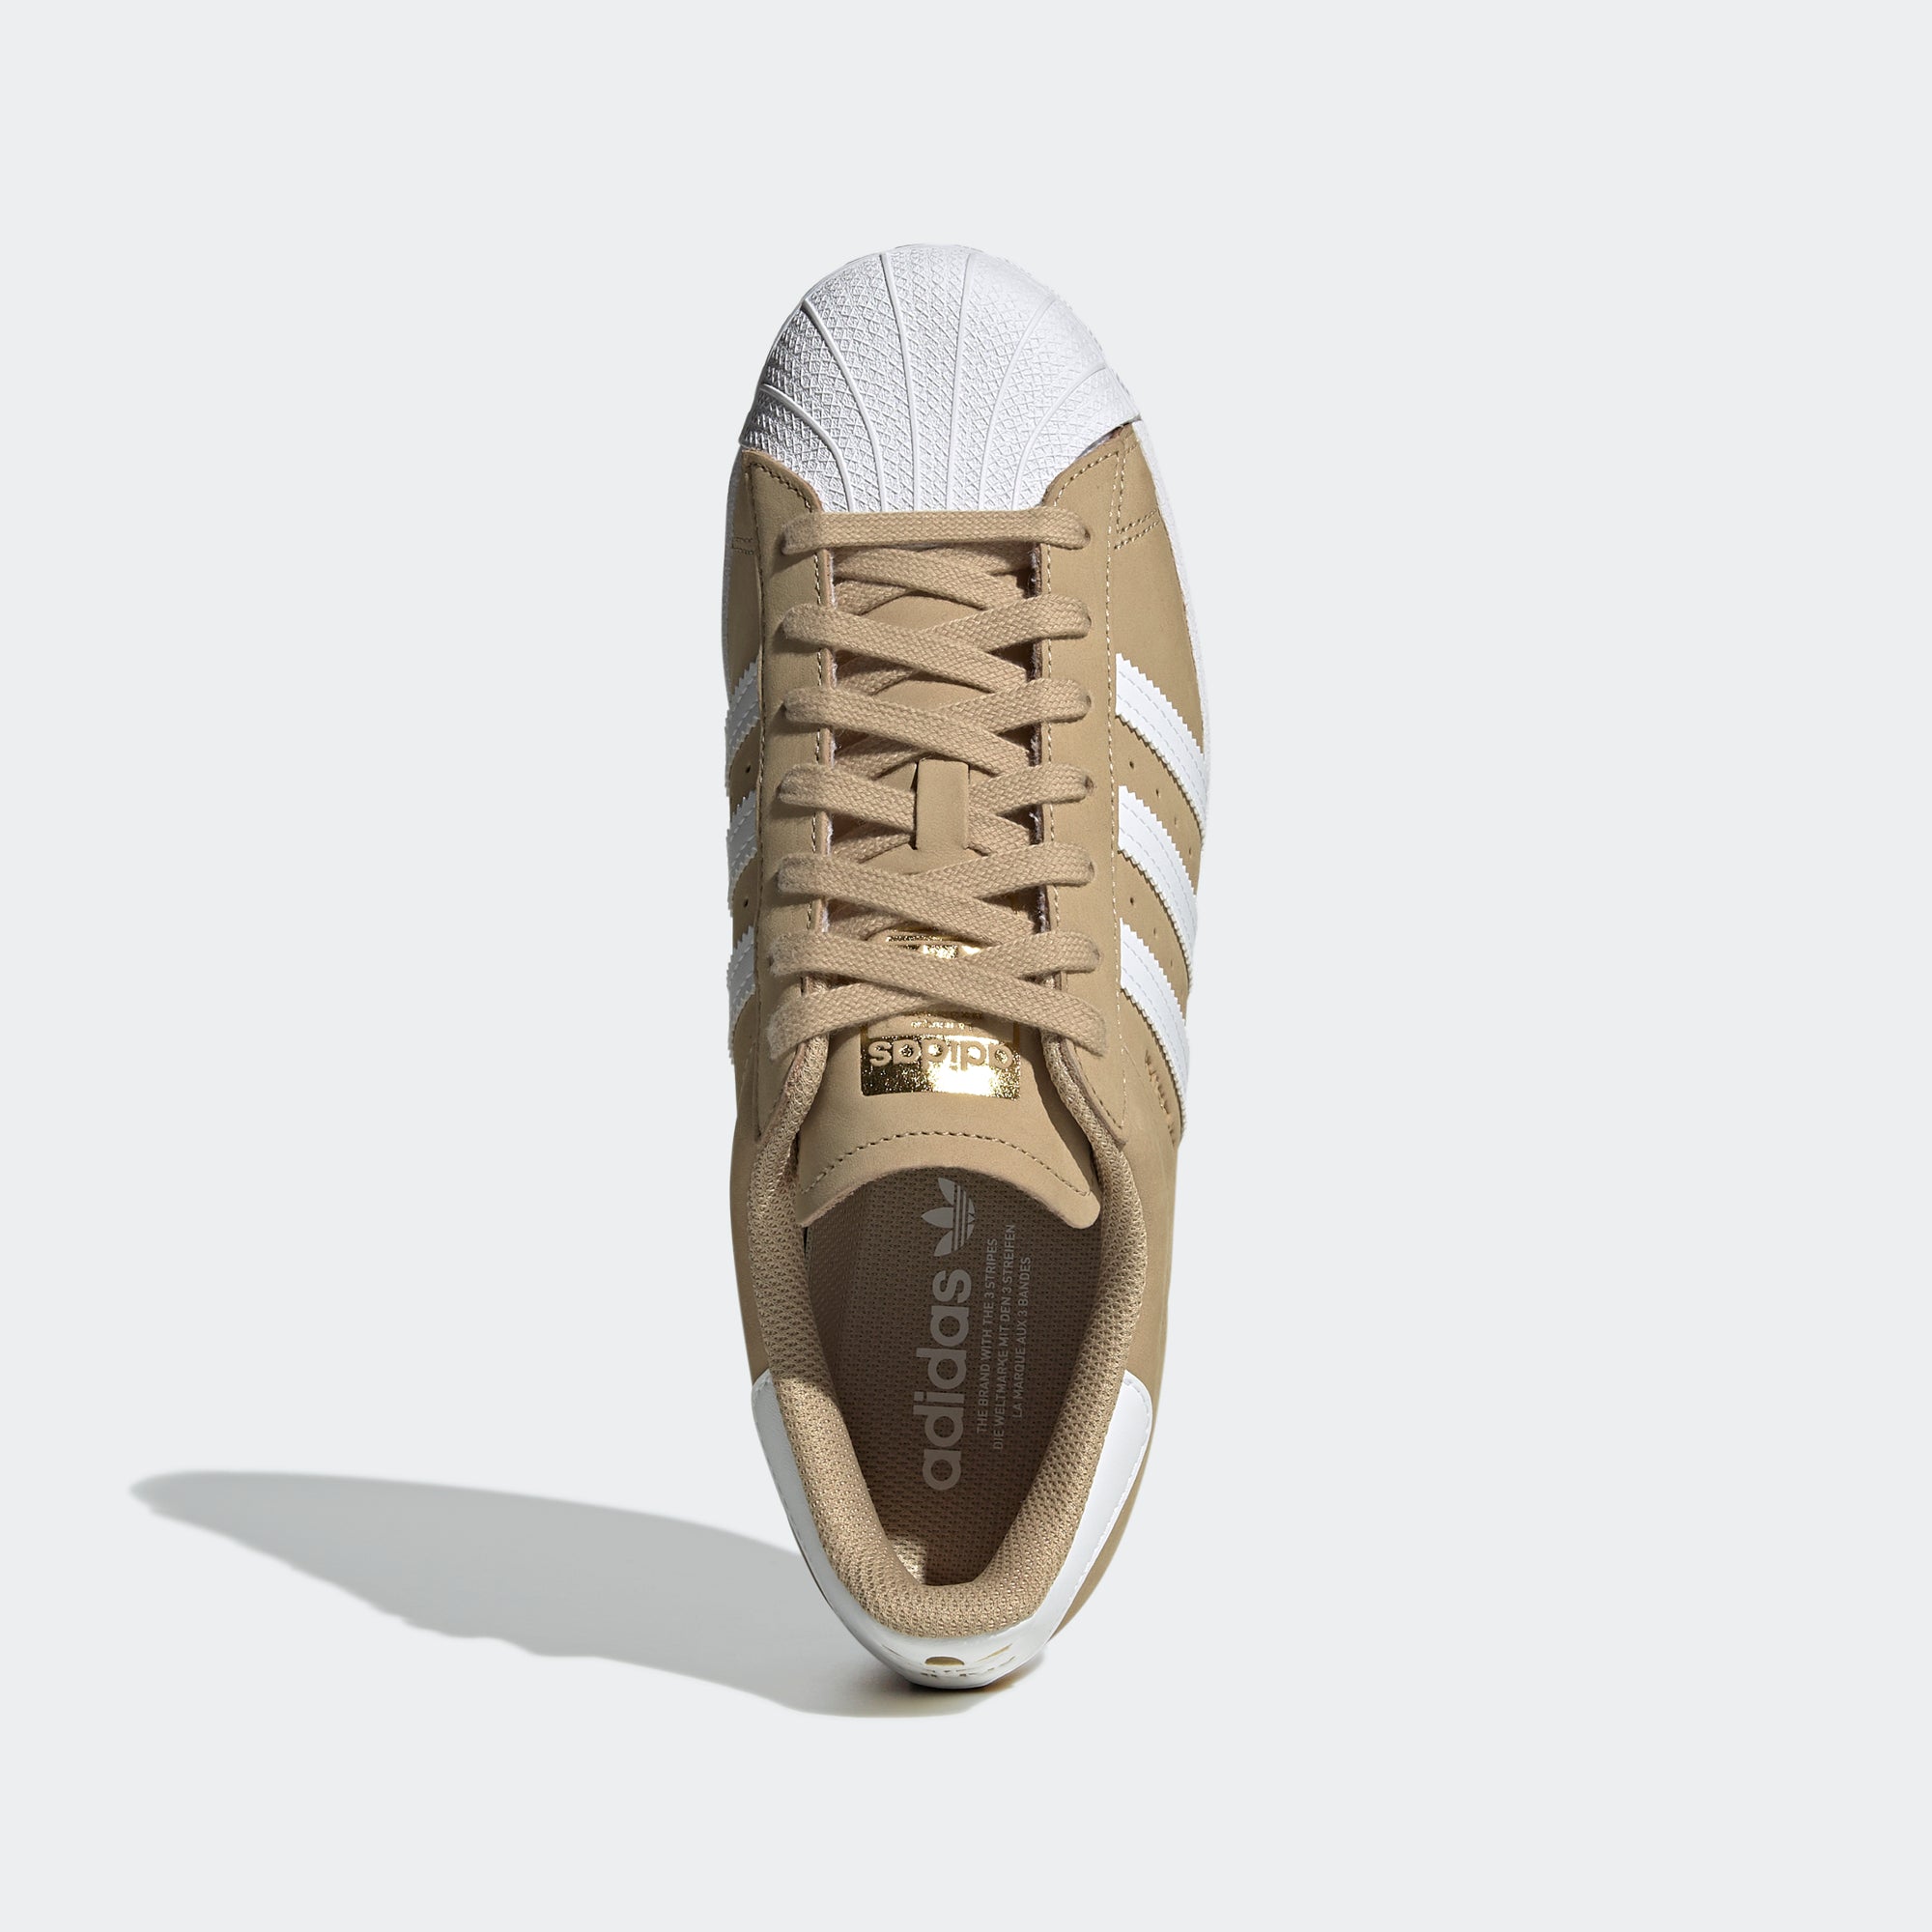 adidas Superstar Shoes Beige Tone H00164 | Chicago City Sports